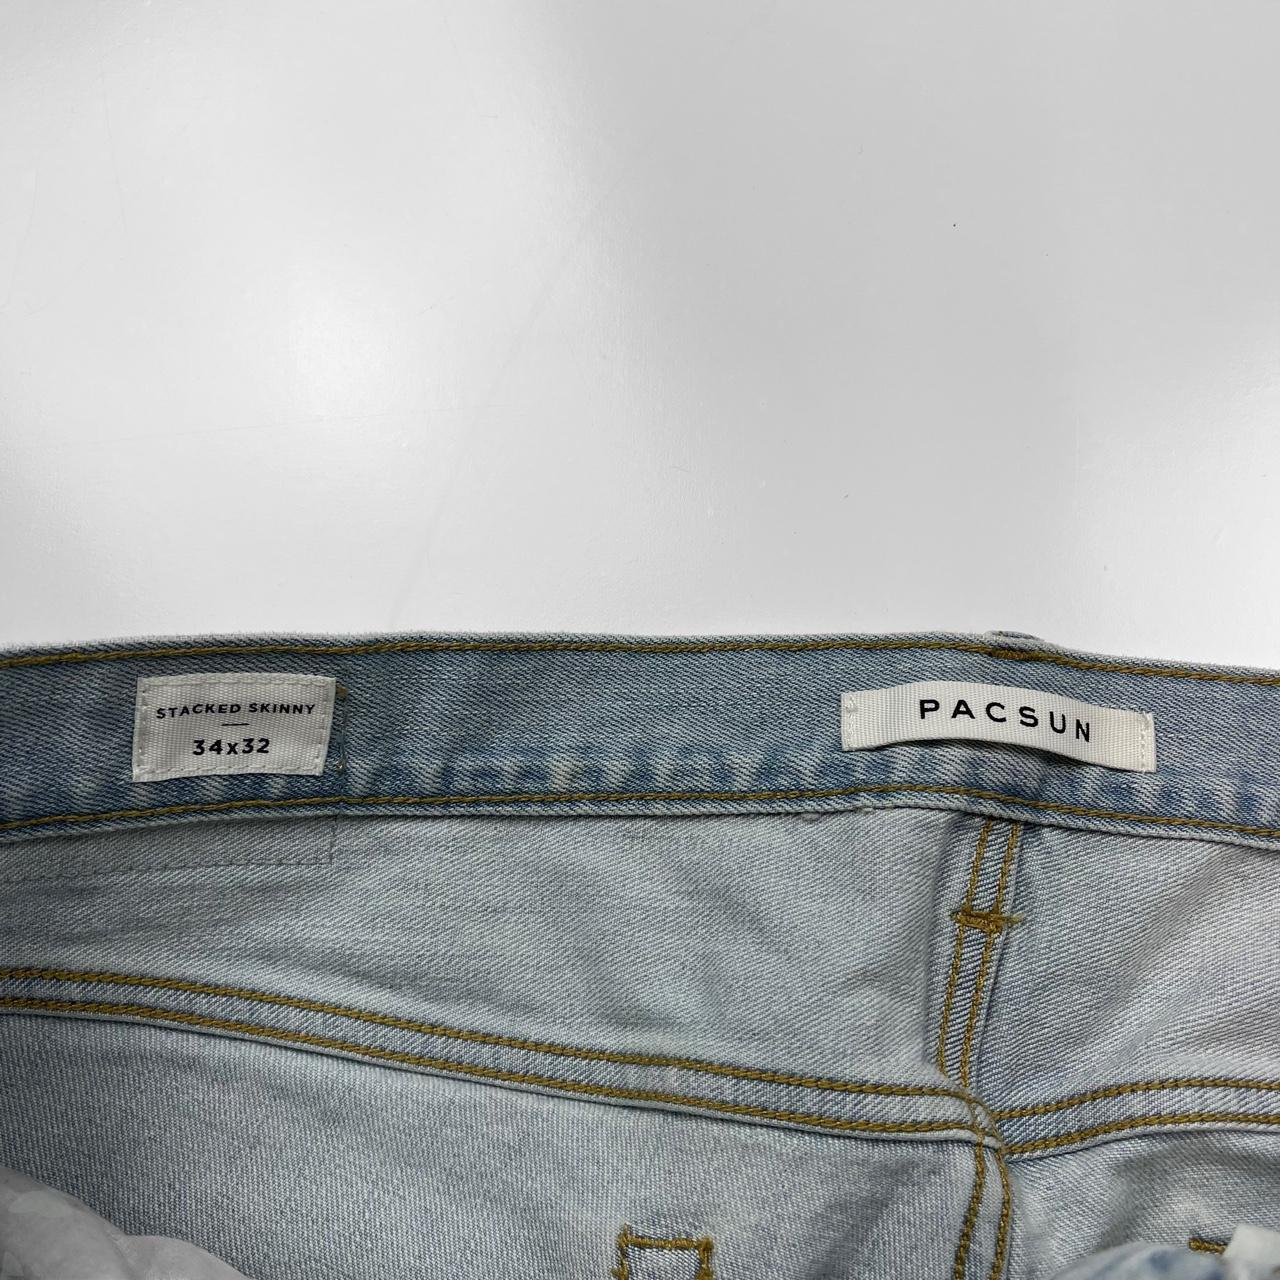 Product Image 4 - Mens Pacsun Stacked Skinny Distressed